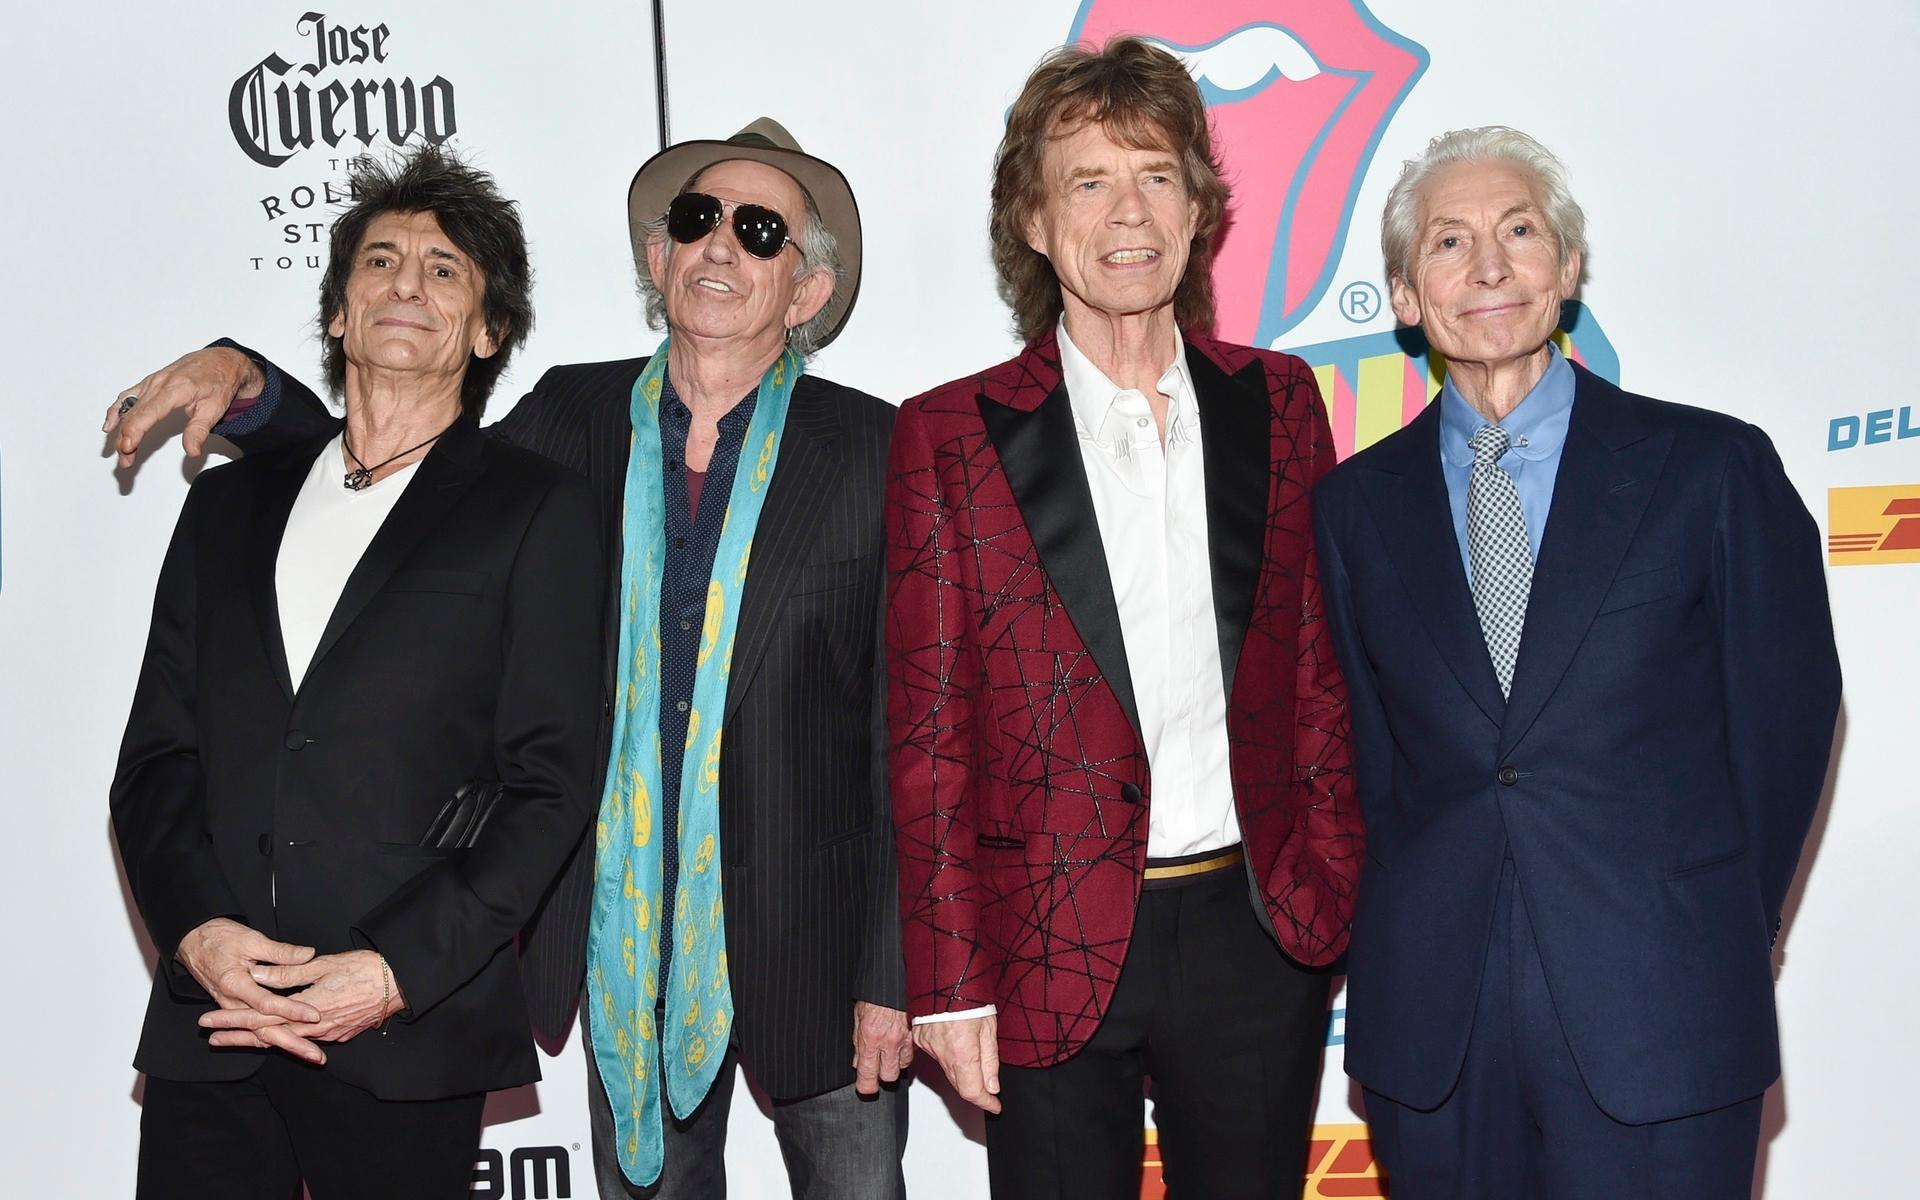 Ronnie Wood, Keith Richards, Mick Jagger and Charlie Watts.